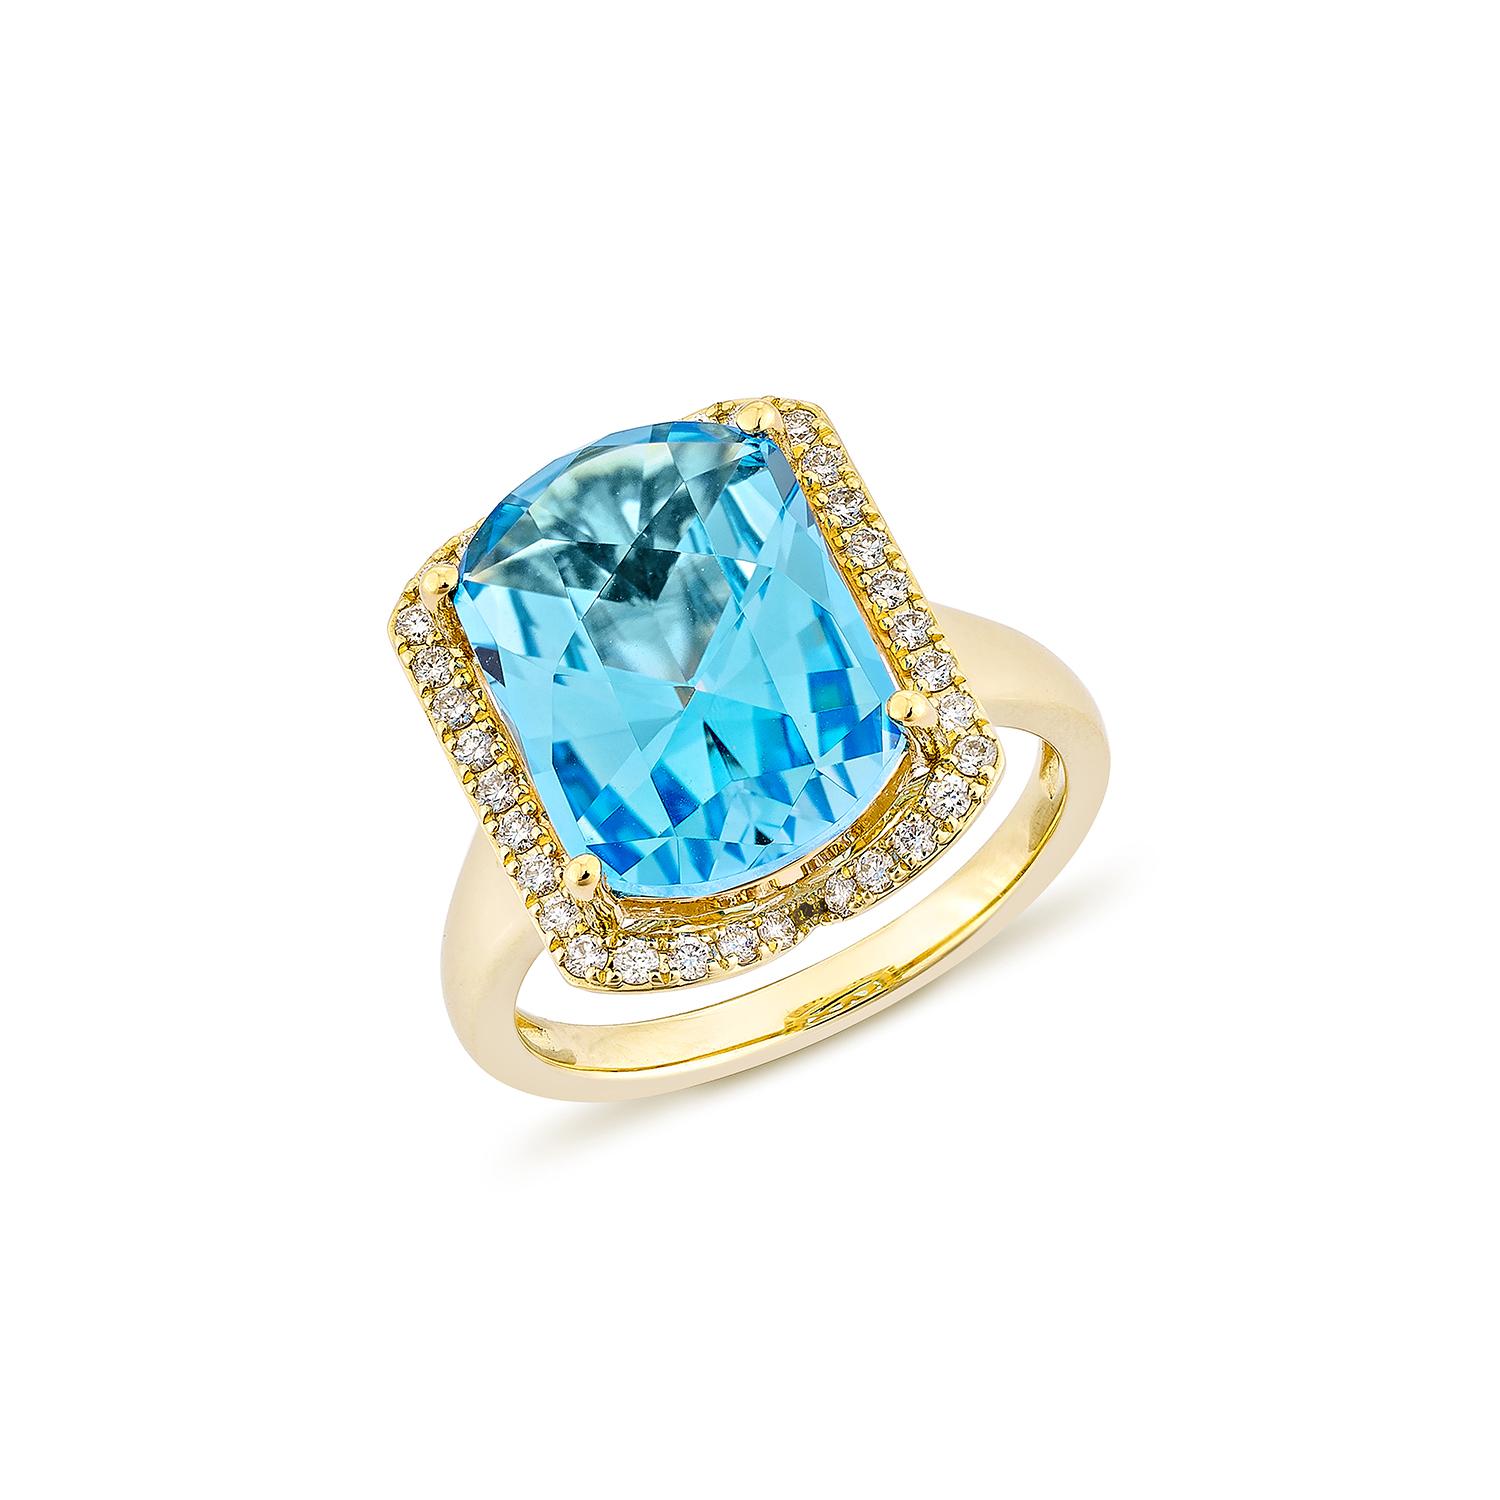 Contemporary 7.83 Carat Swiss Blue Topaz Fancy Ring in 18Karat Yellow Gold with Diamond. For Sale